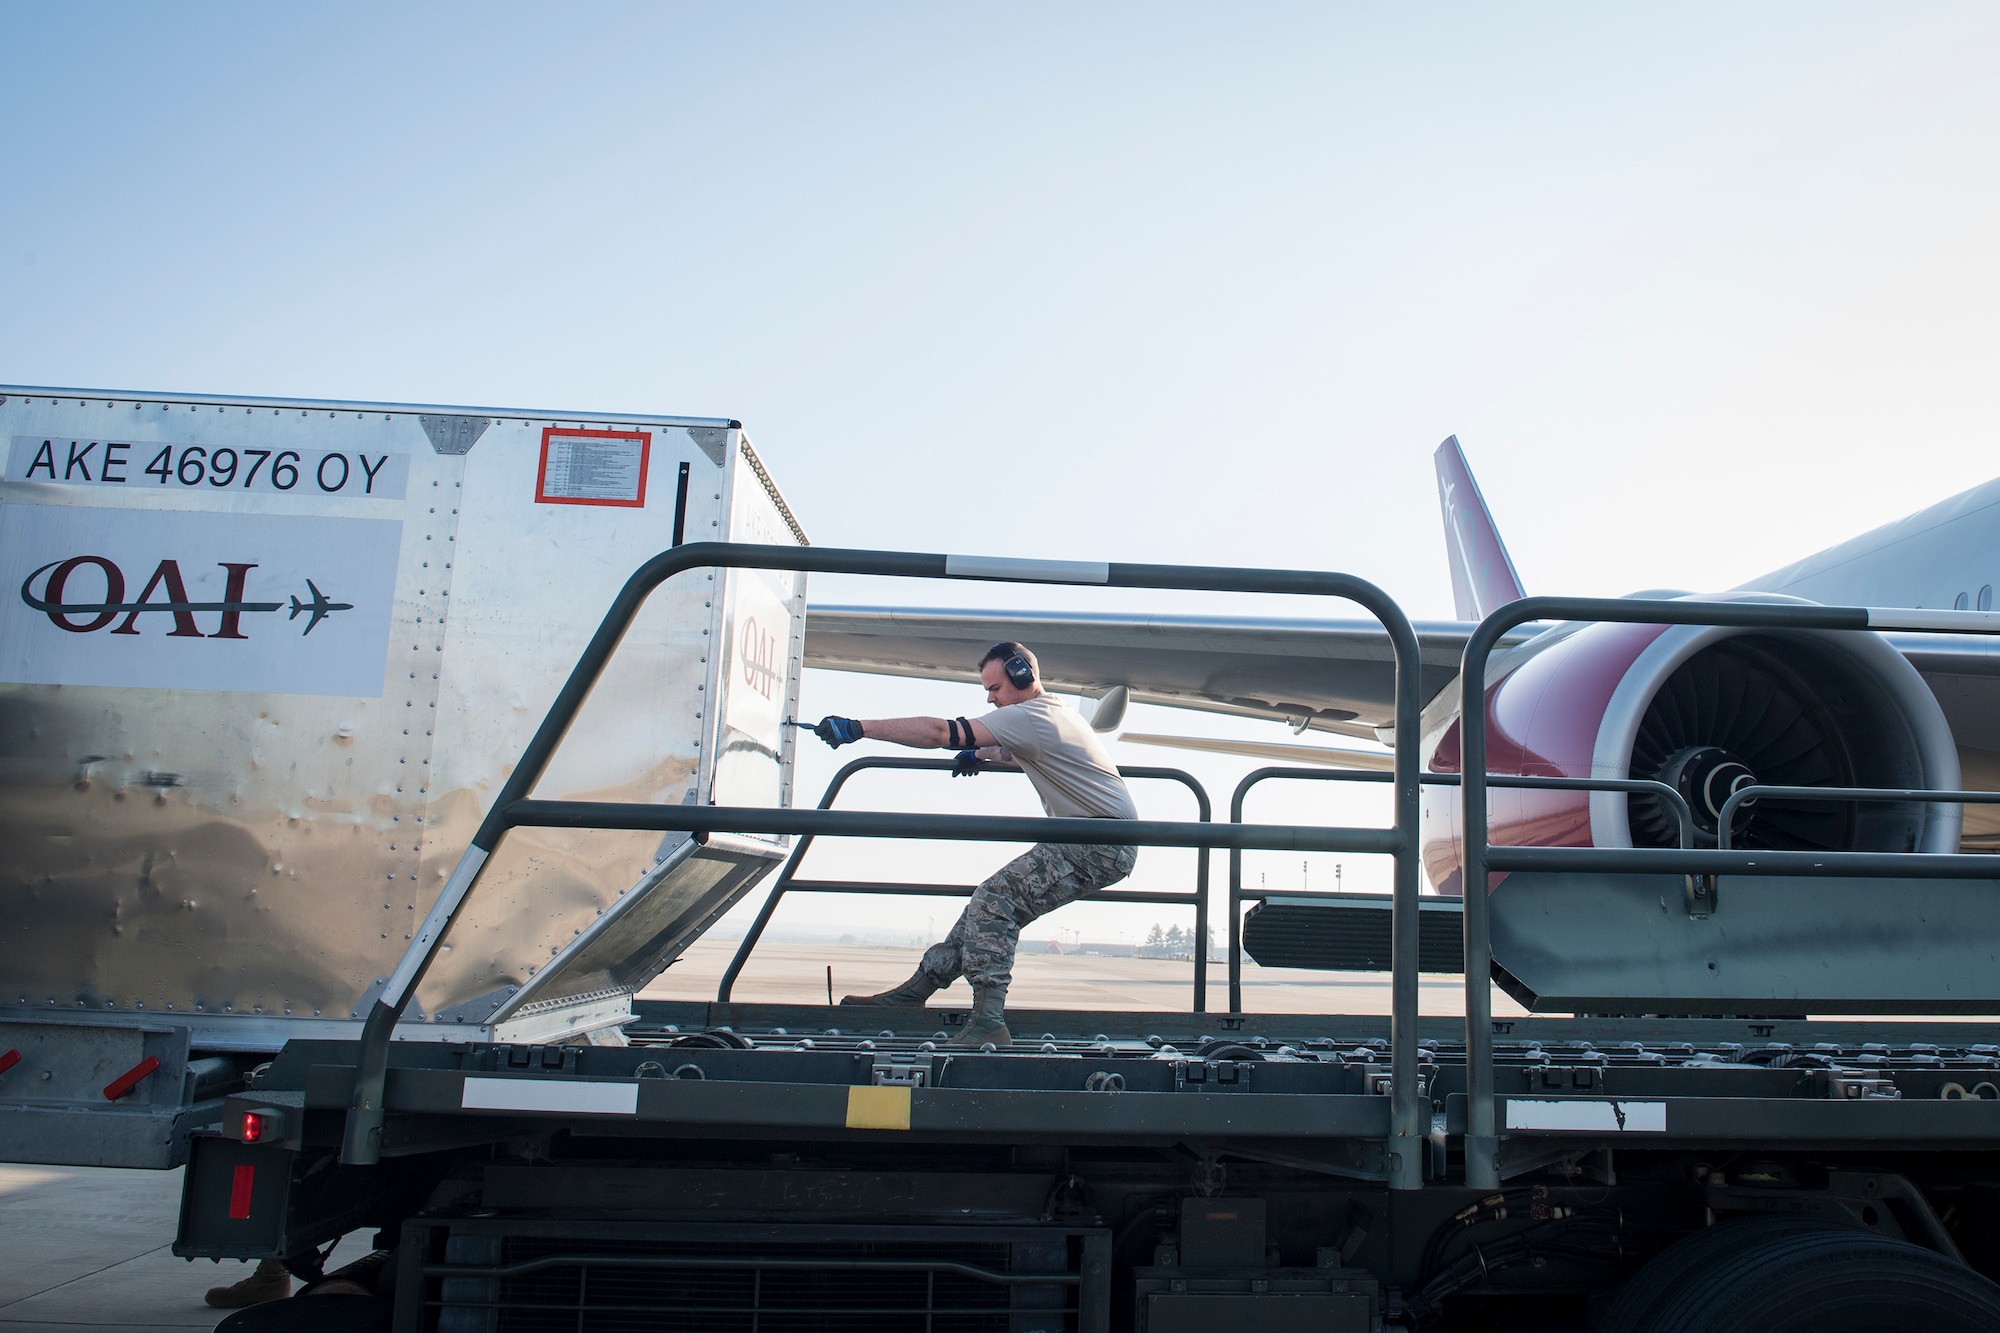 Airman Dylan Albright, 728th Air Mobility Squadron aircraft service journeyman pulls a luggage container March 19, 2019, at Incirlik Air Base, Turkey. The squadron falls under the 521st Air Mobility Operations Group, headquartered at Naval Station Rota, Spain, and the 521st Air Mobility Operations Wing, headquartered at Ramstein Air Base, Germany. (U.S. Air Force photo by Staff Sgt. Ceaira Tinsley)